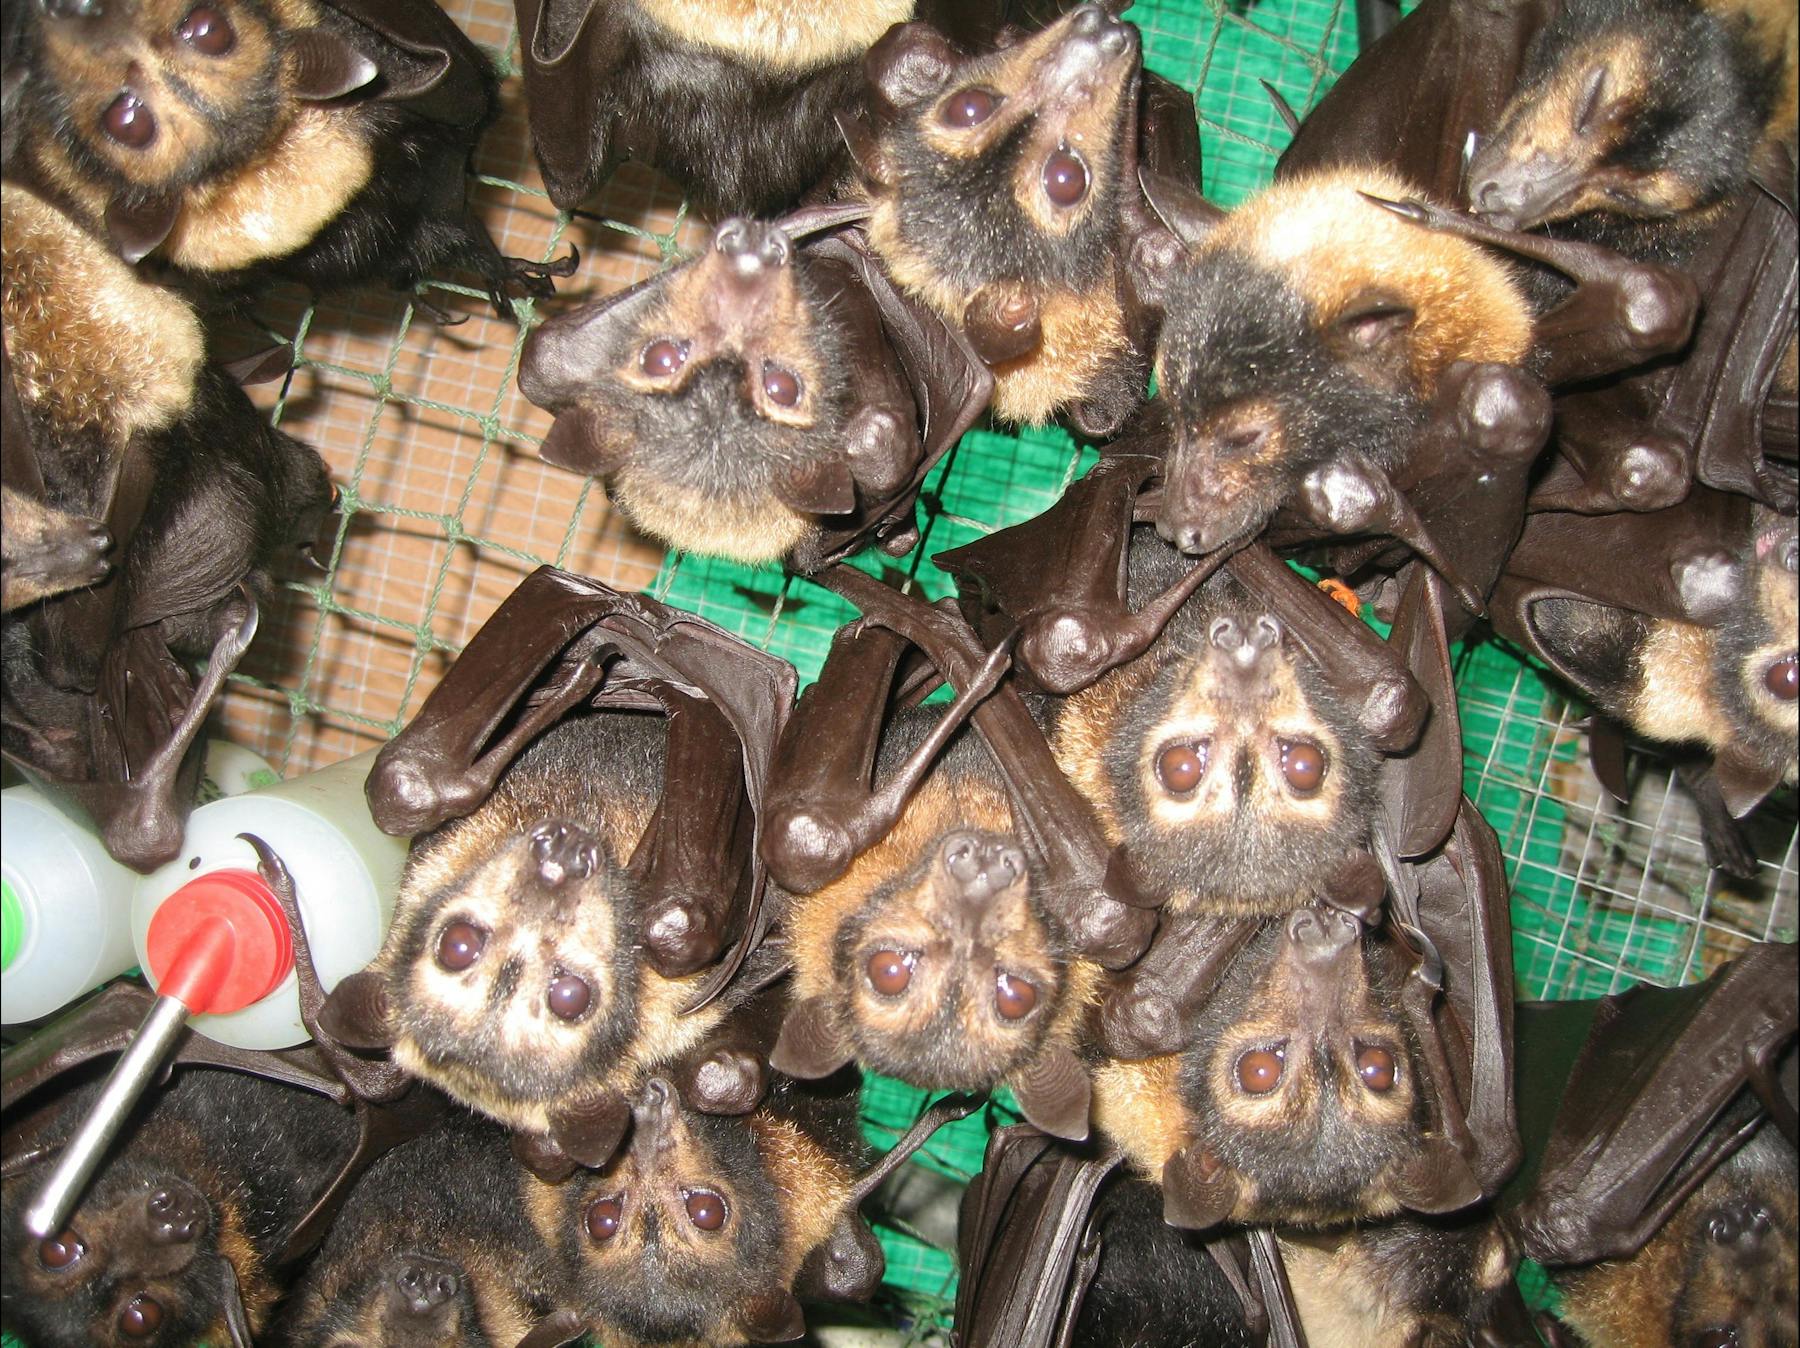 Lots of baby flying fox orphans